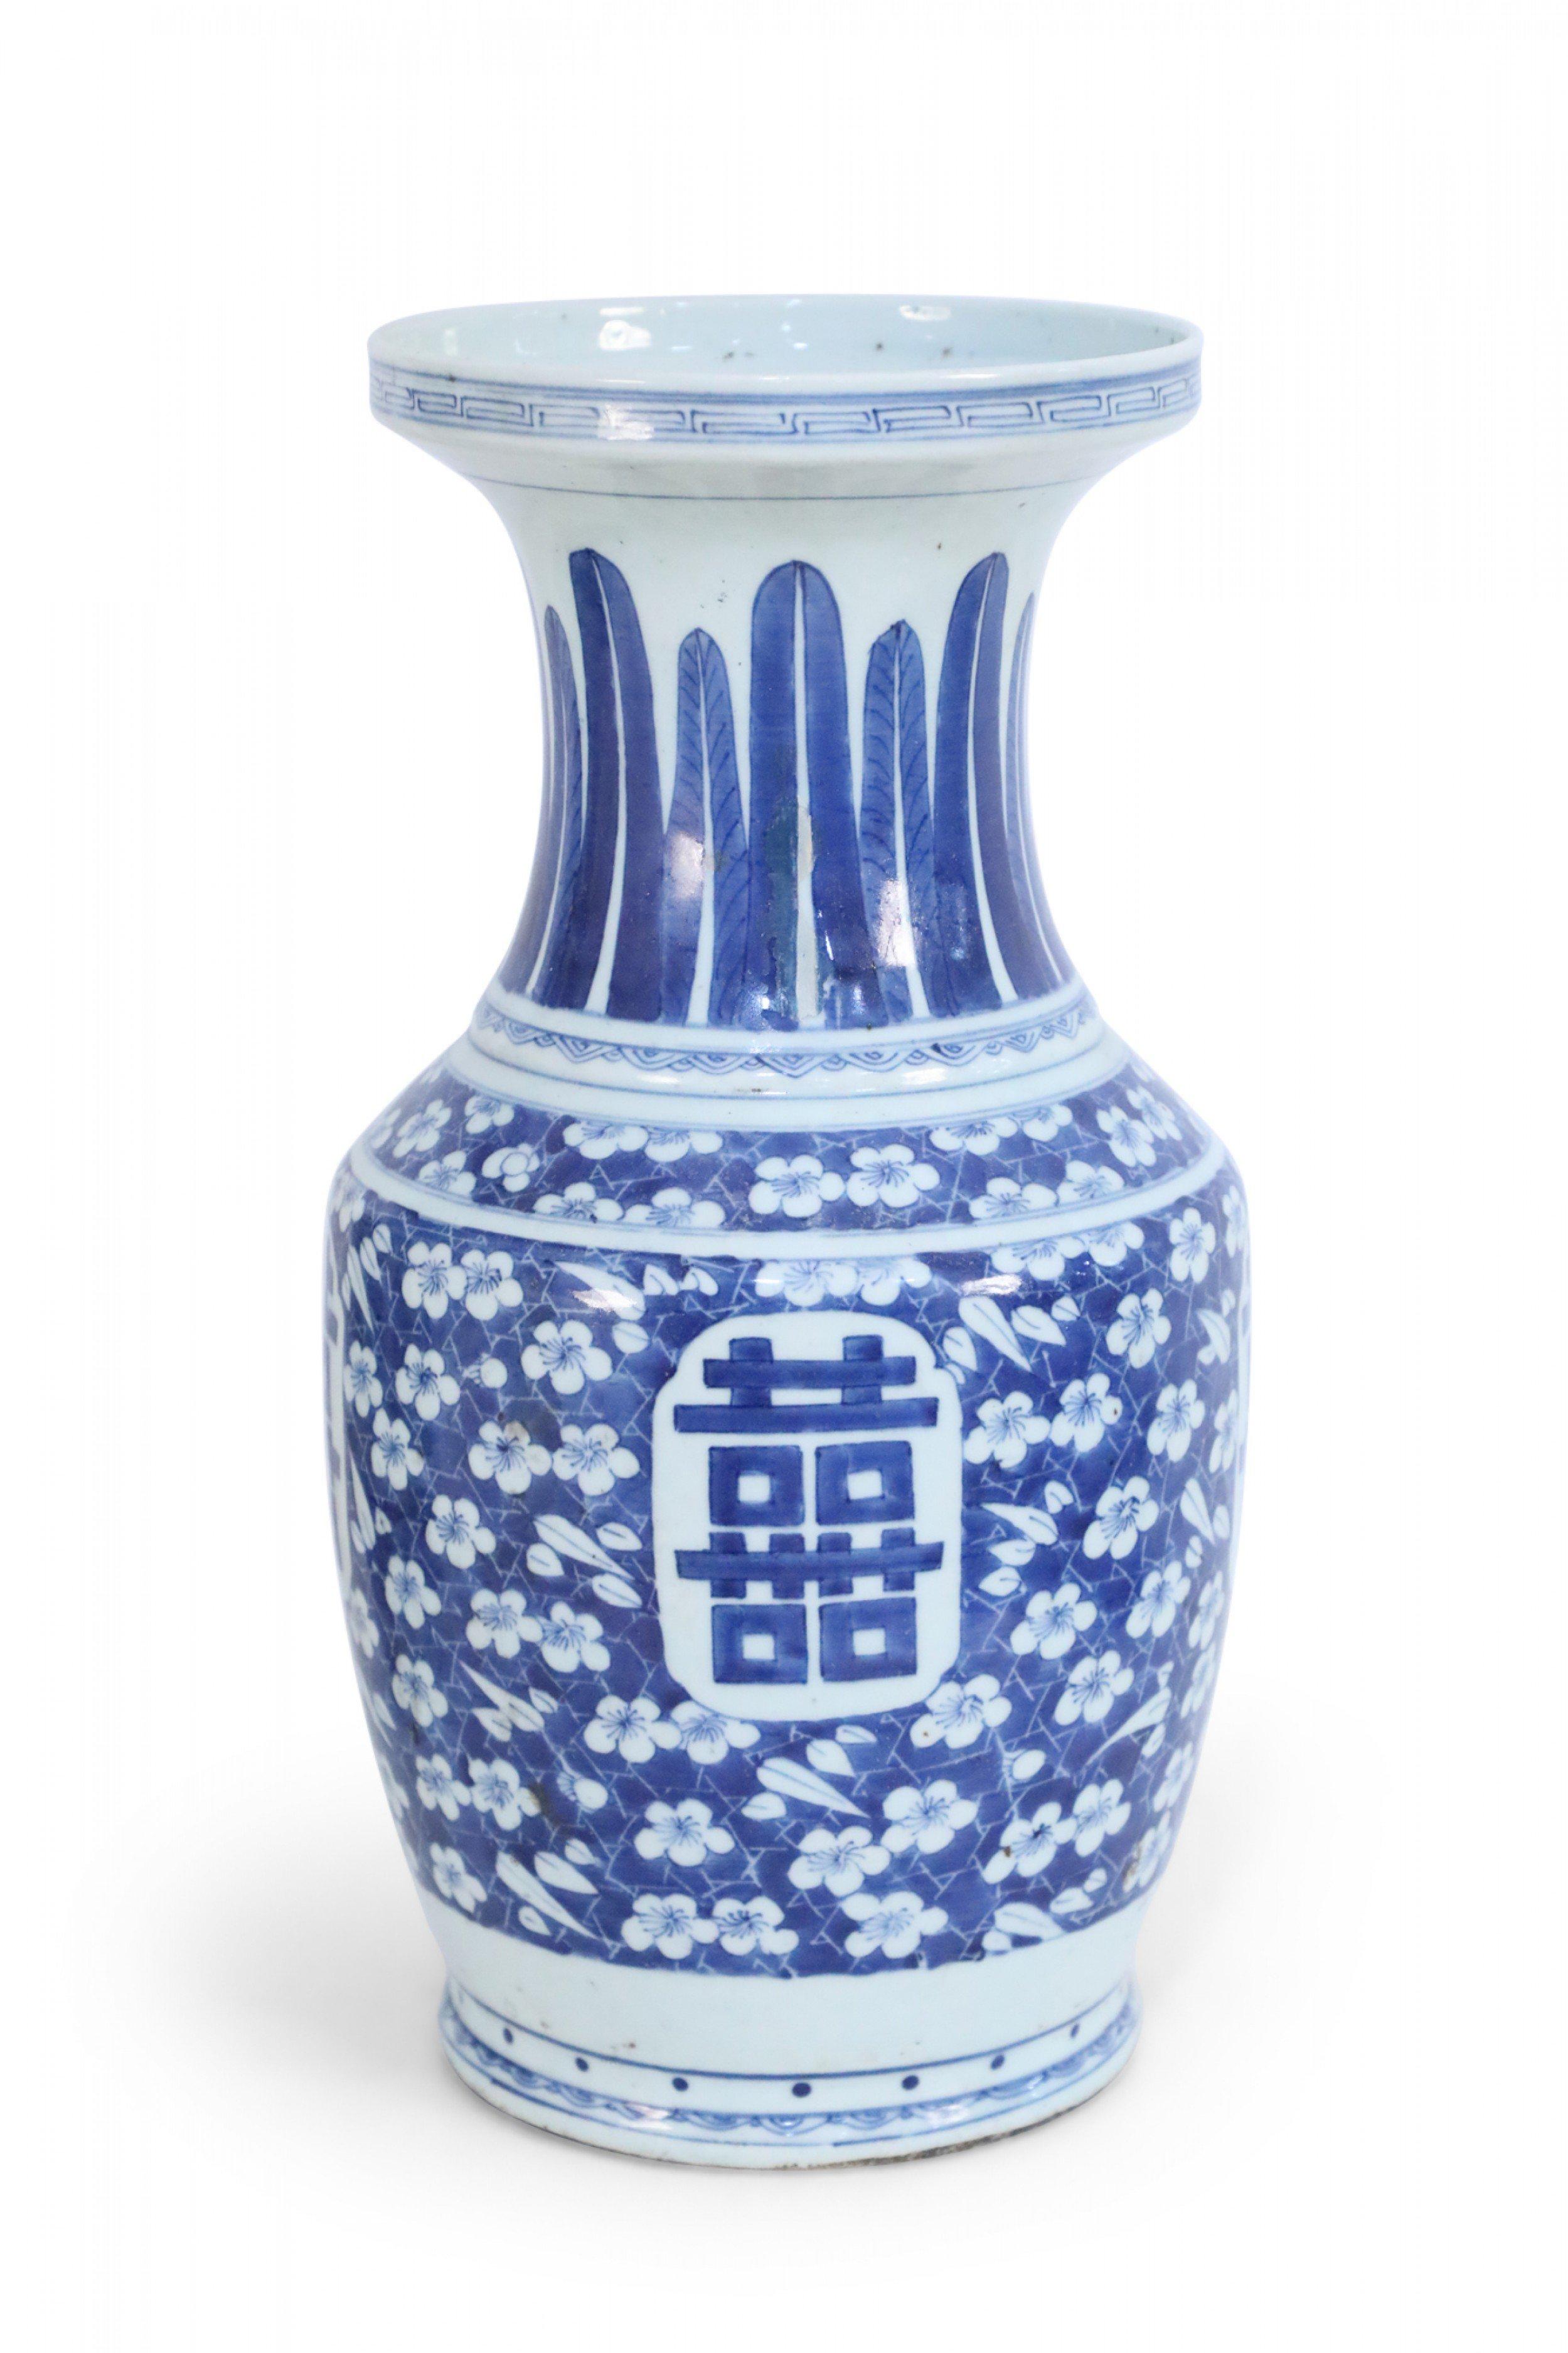 Chinese White and Blue Feather and Floral Motif Porcelain Urn For Sale 4